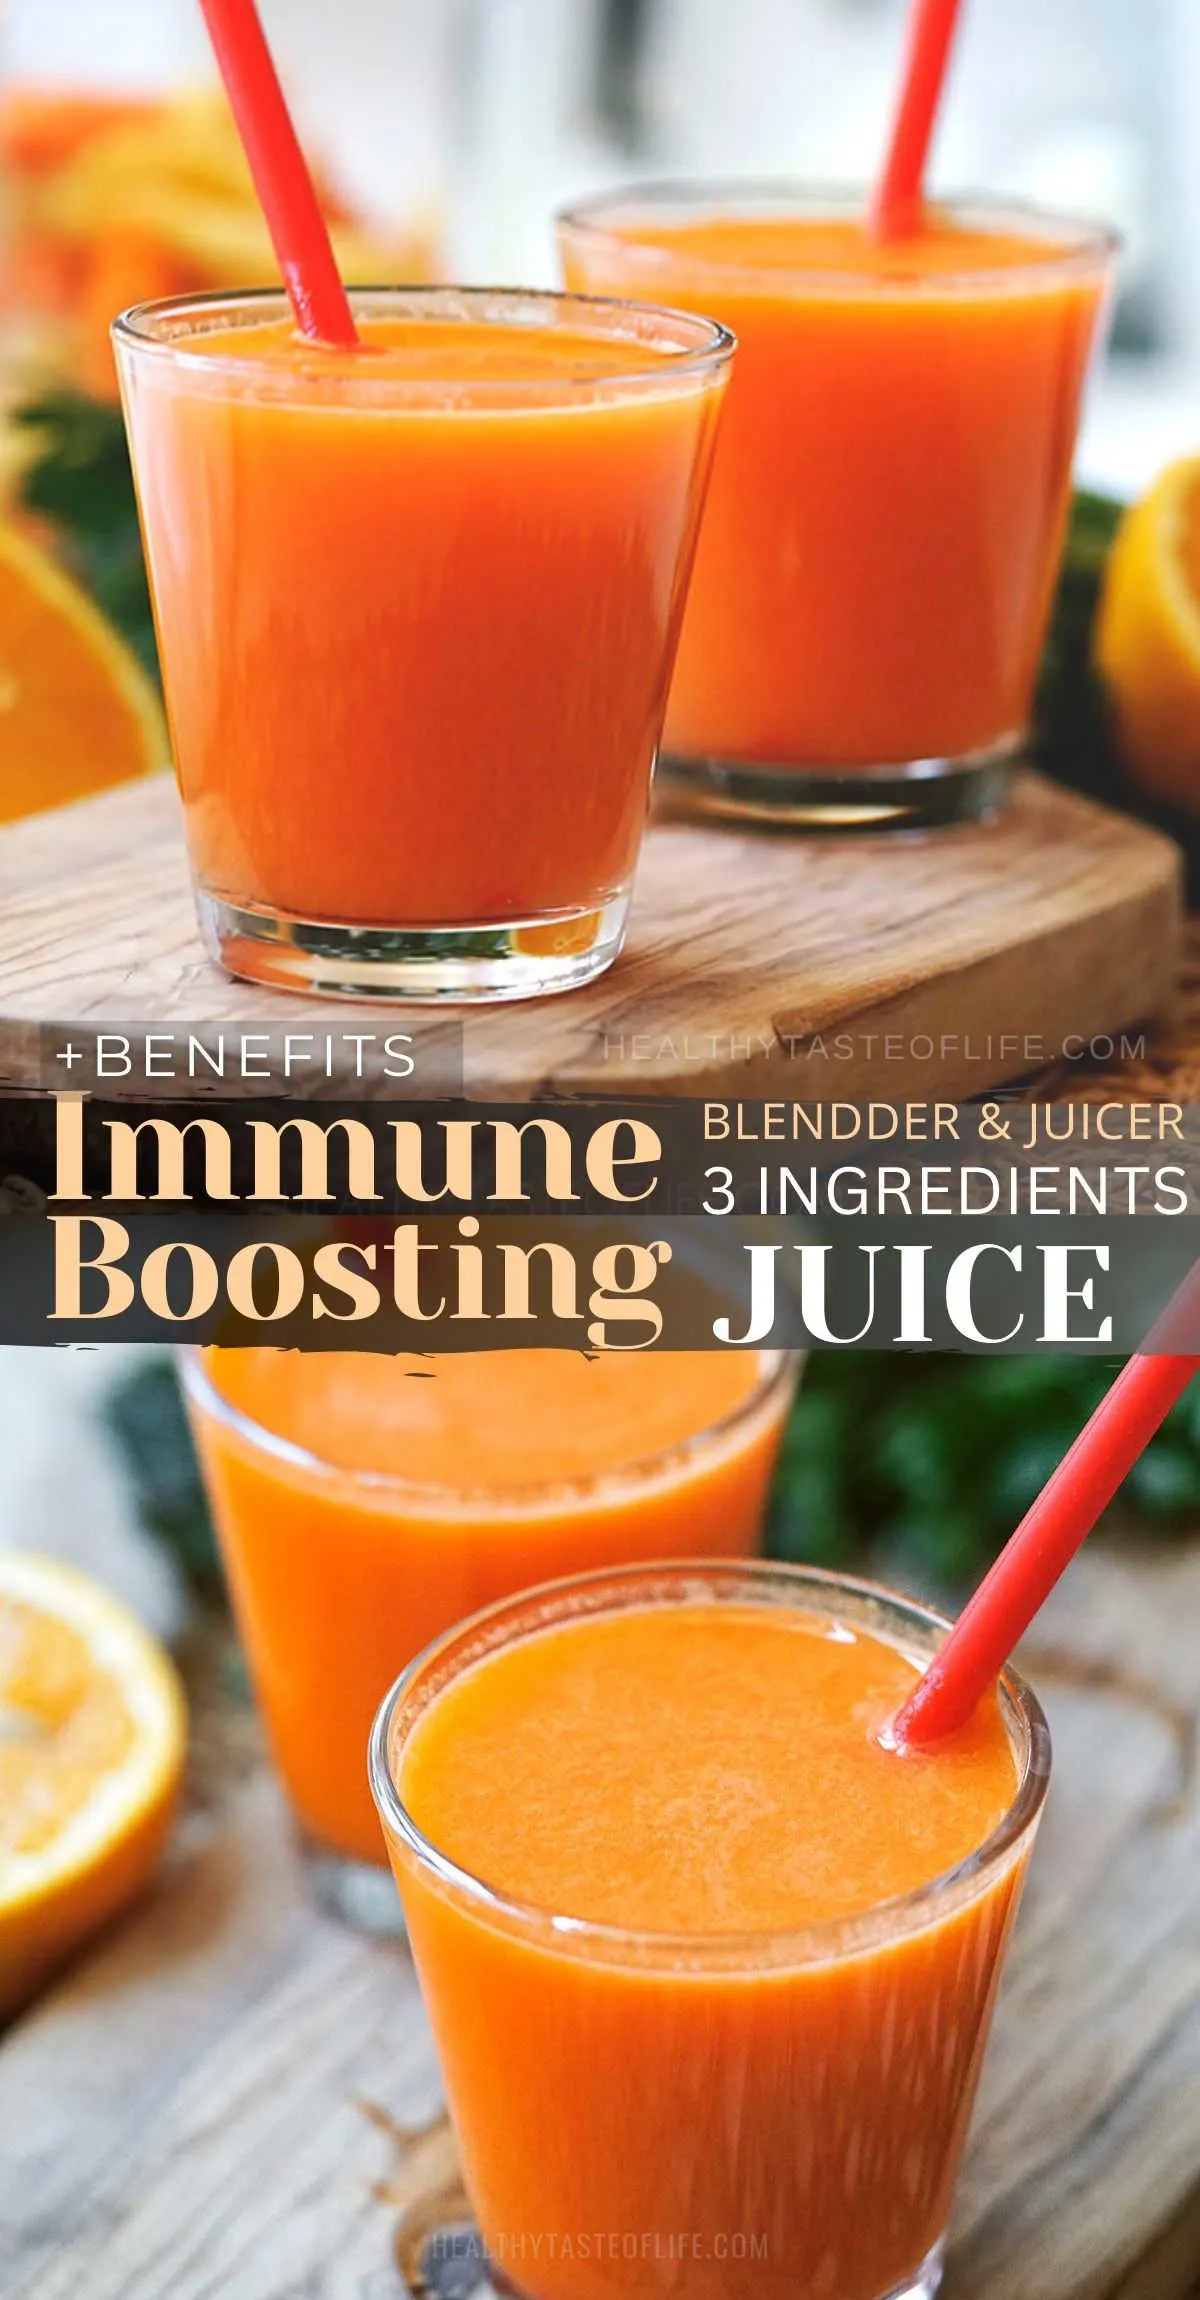 This immune booster juice is made with carrot orange and ginger and makes the perfect immunity booster drink for adults & kids. Healthy and refreshing, but ialso tasty, easy to make and with a vibrant color! It’s the best immunity juice recipe that you can make by either using a juicer or a blender. This carrot orange ginger juice is not only great for boosting immunity, but it's also excellent for skin, eyesight, and cardiovascular health. #immunity #juice #immunebooster #orange #carrot #ginger